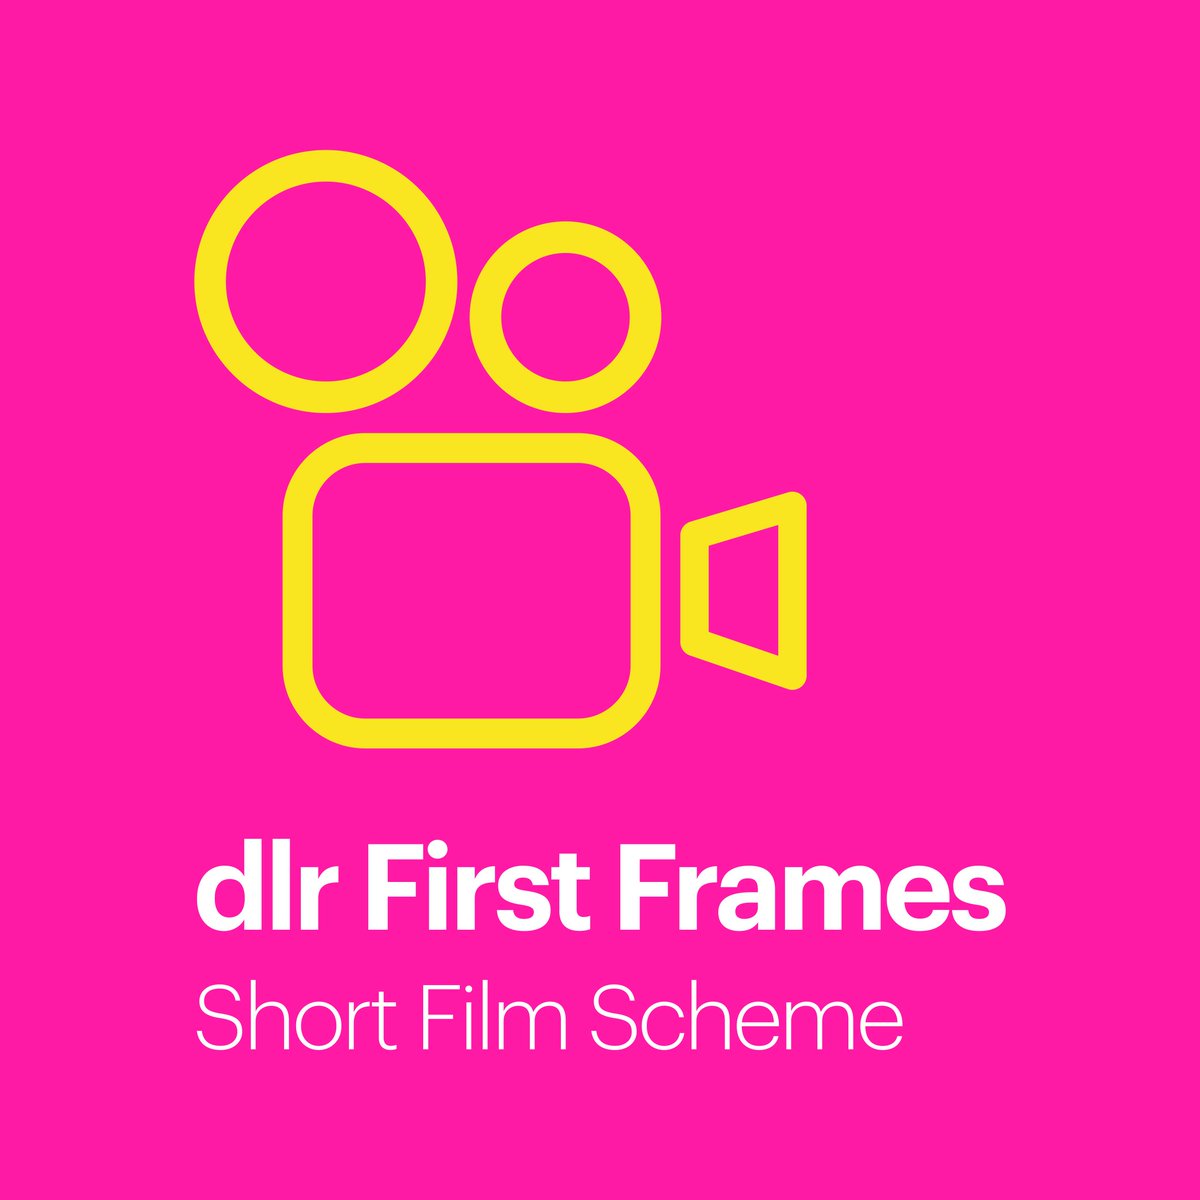 We are so excited to be involved in #dlrFirstFrames short film scheme! Have you registered for the information session yet (2nd Oct, dlr LexIcon)? Find out more & register bit.ly/dlrFirstFrames @dlrArts @birchhh @iftn @screenskillsire @ScreenIreland @AnRonanEile @barrydignam